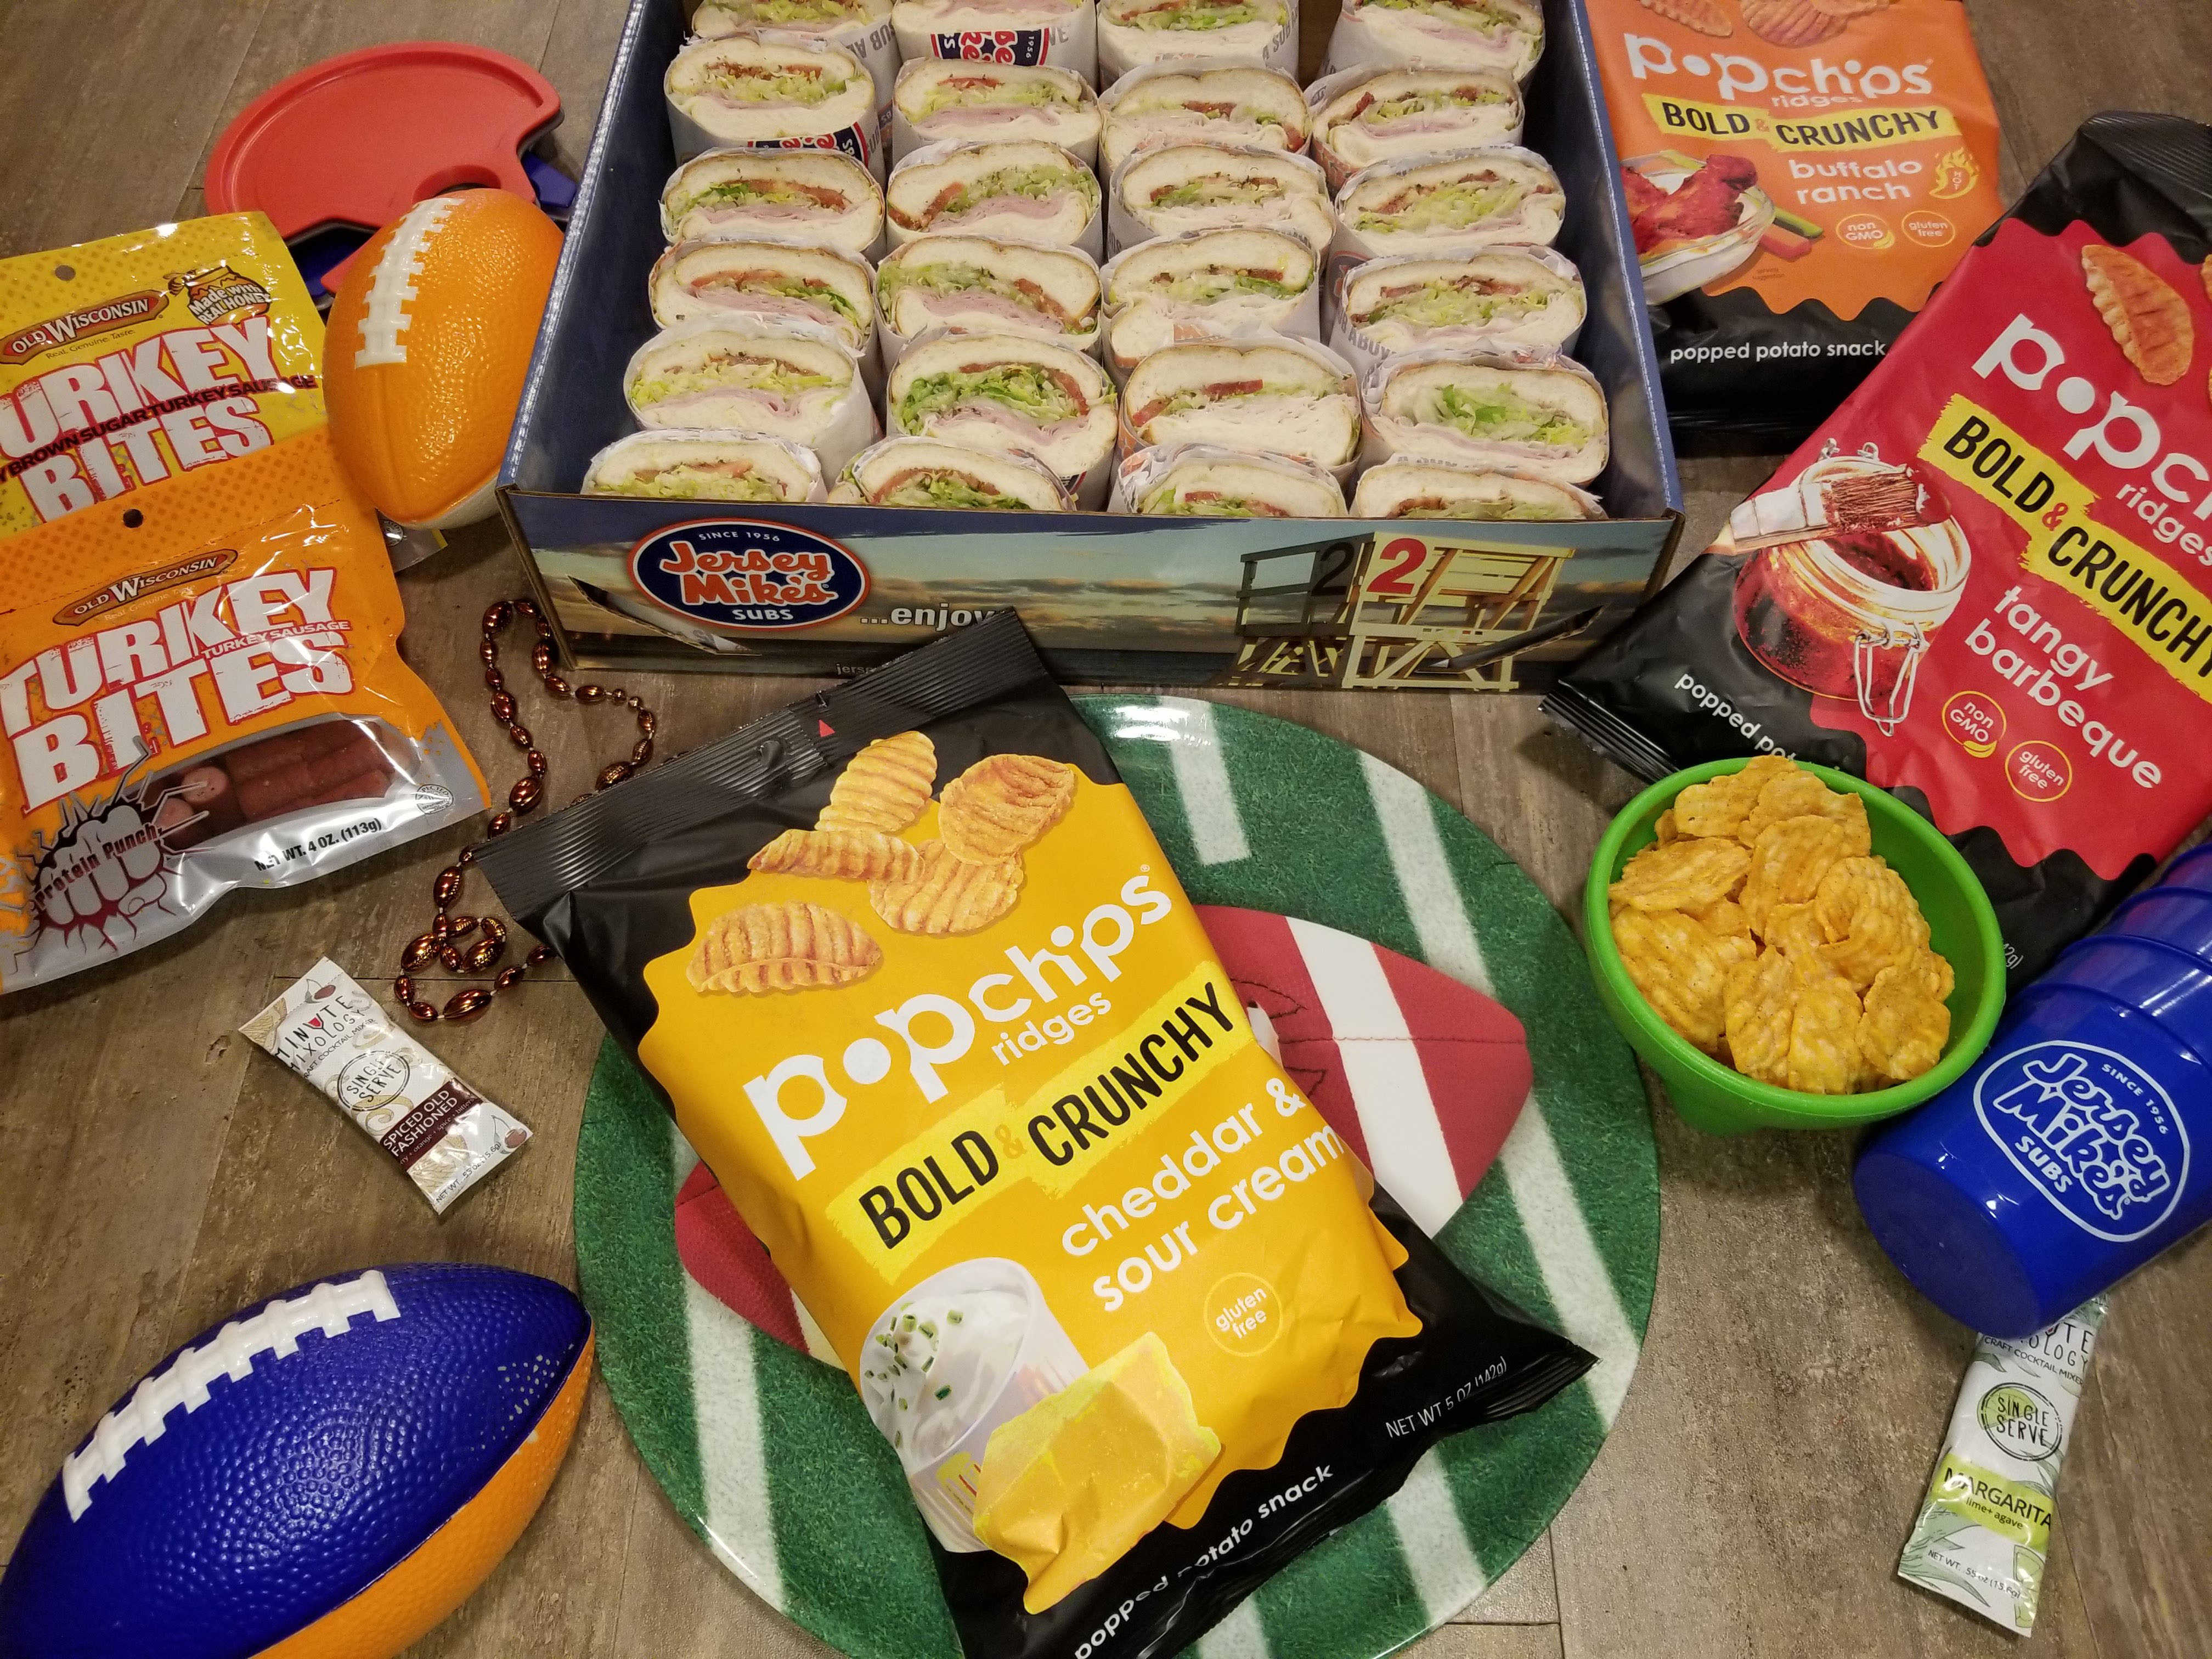 Football Game Day Food: Fun with Your Family and Friends